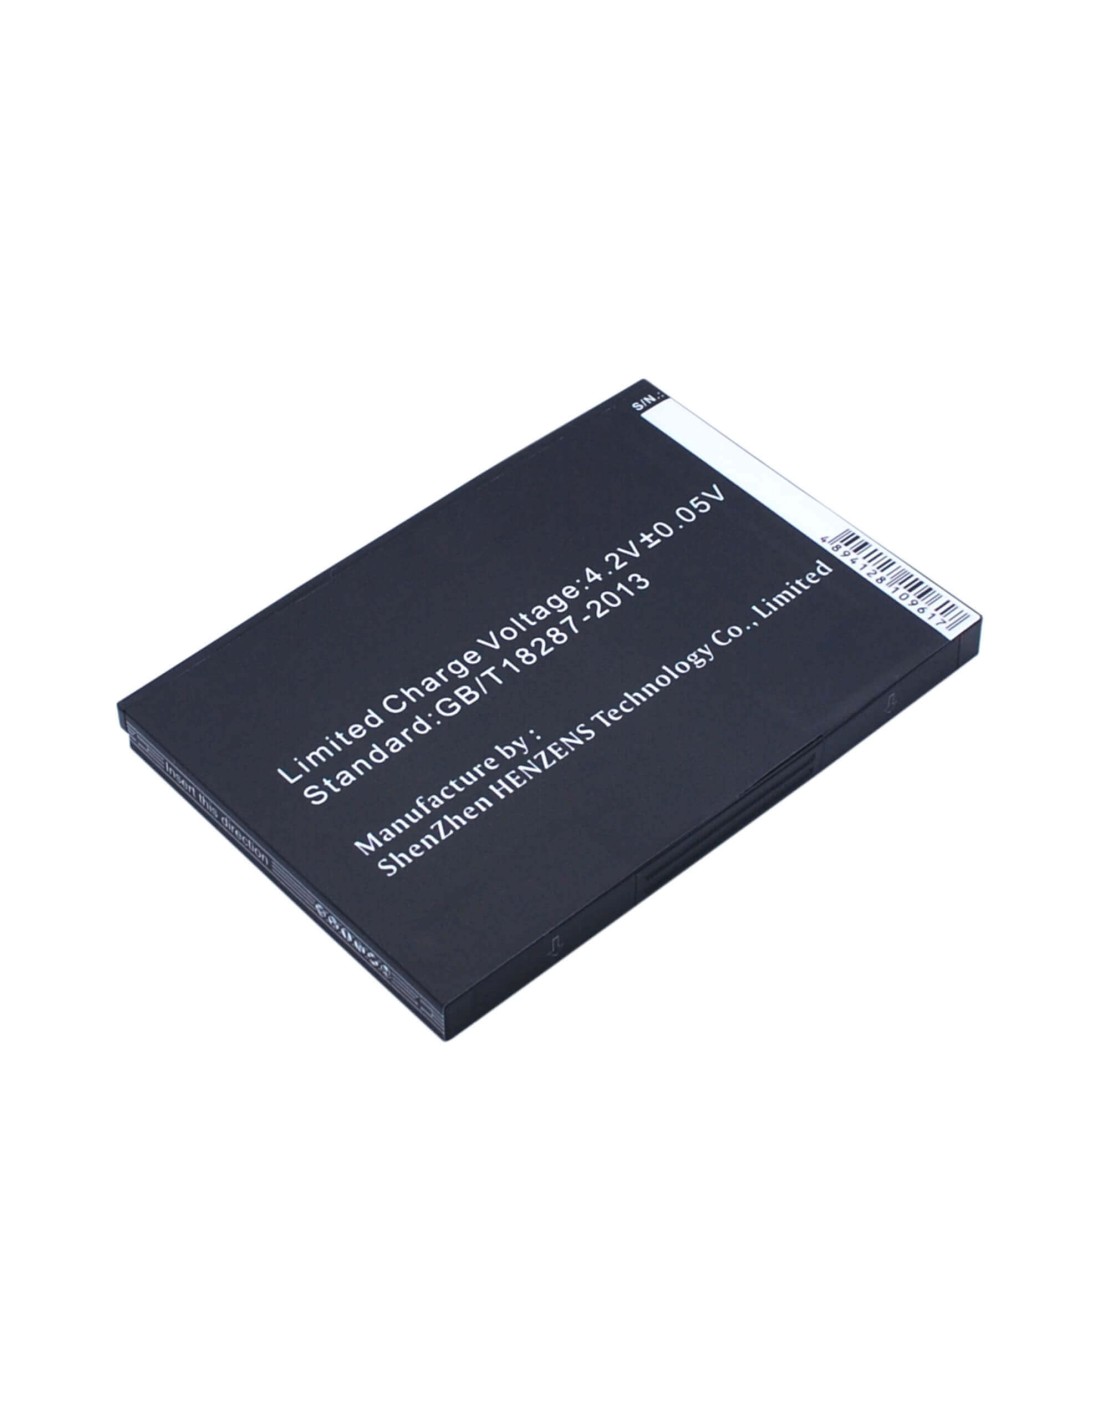 Battery for Boostmobile Ac779s, Aircard 779s, Aircard 779s 4g 3.7V, 2000mAh - 7.40Wh